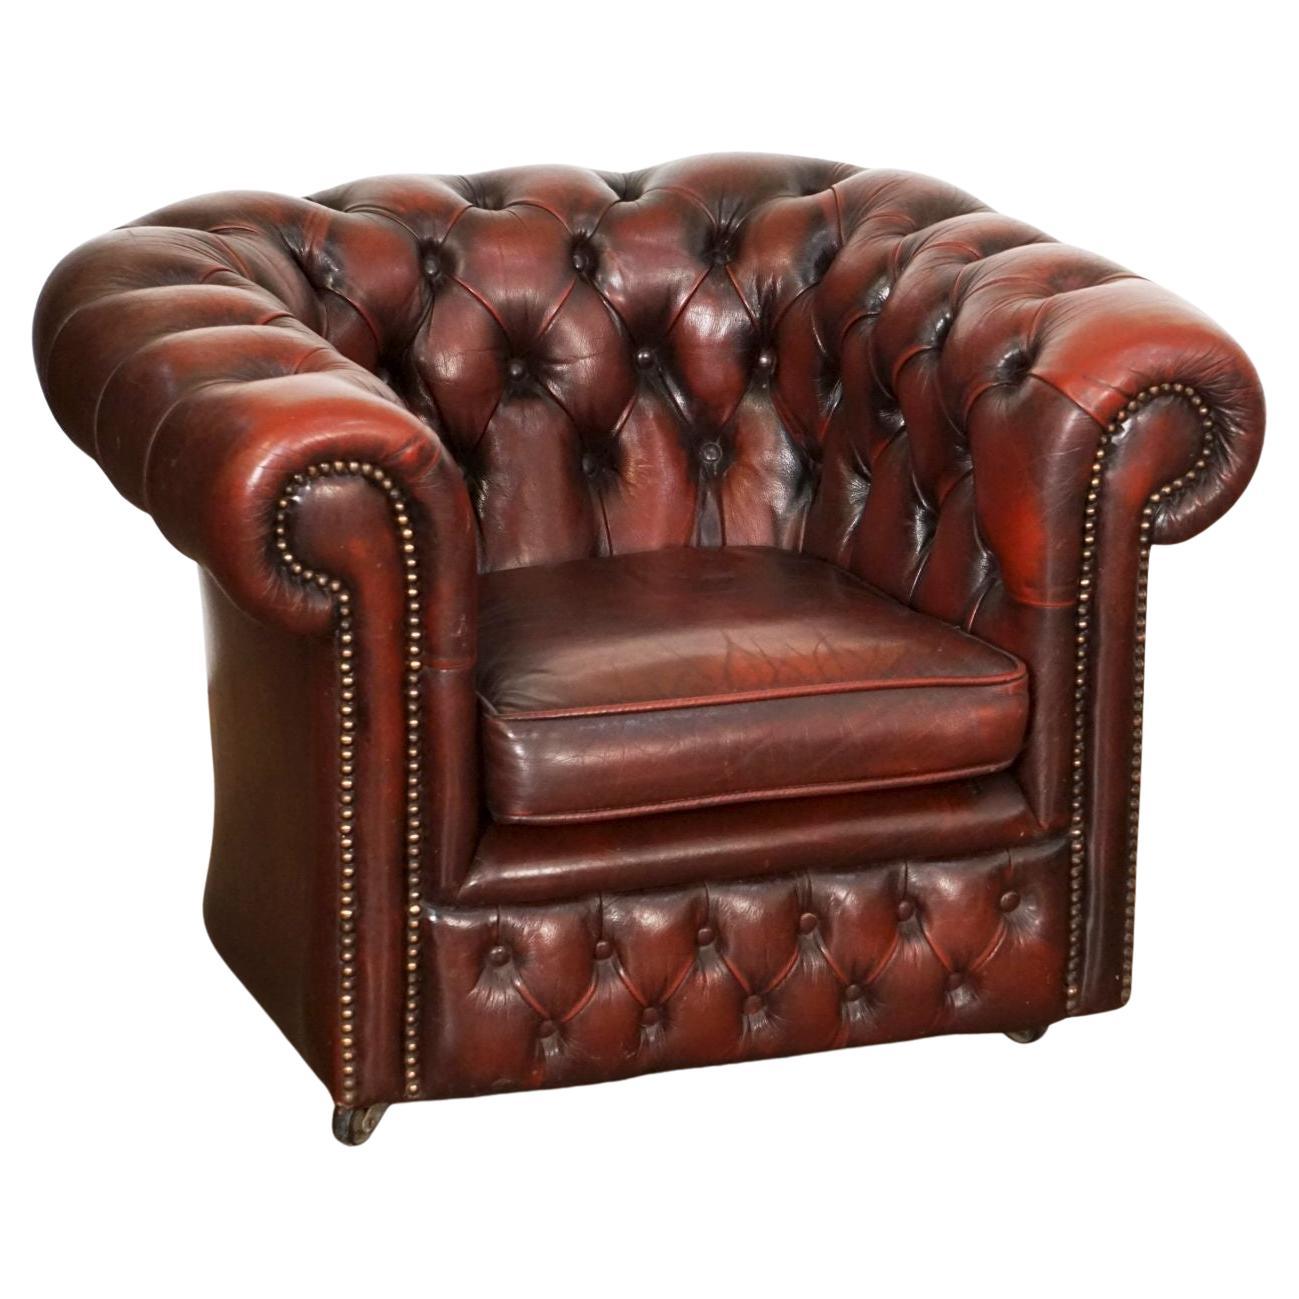 Child's Leather Chesterfield Club Chair from England